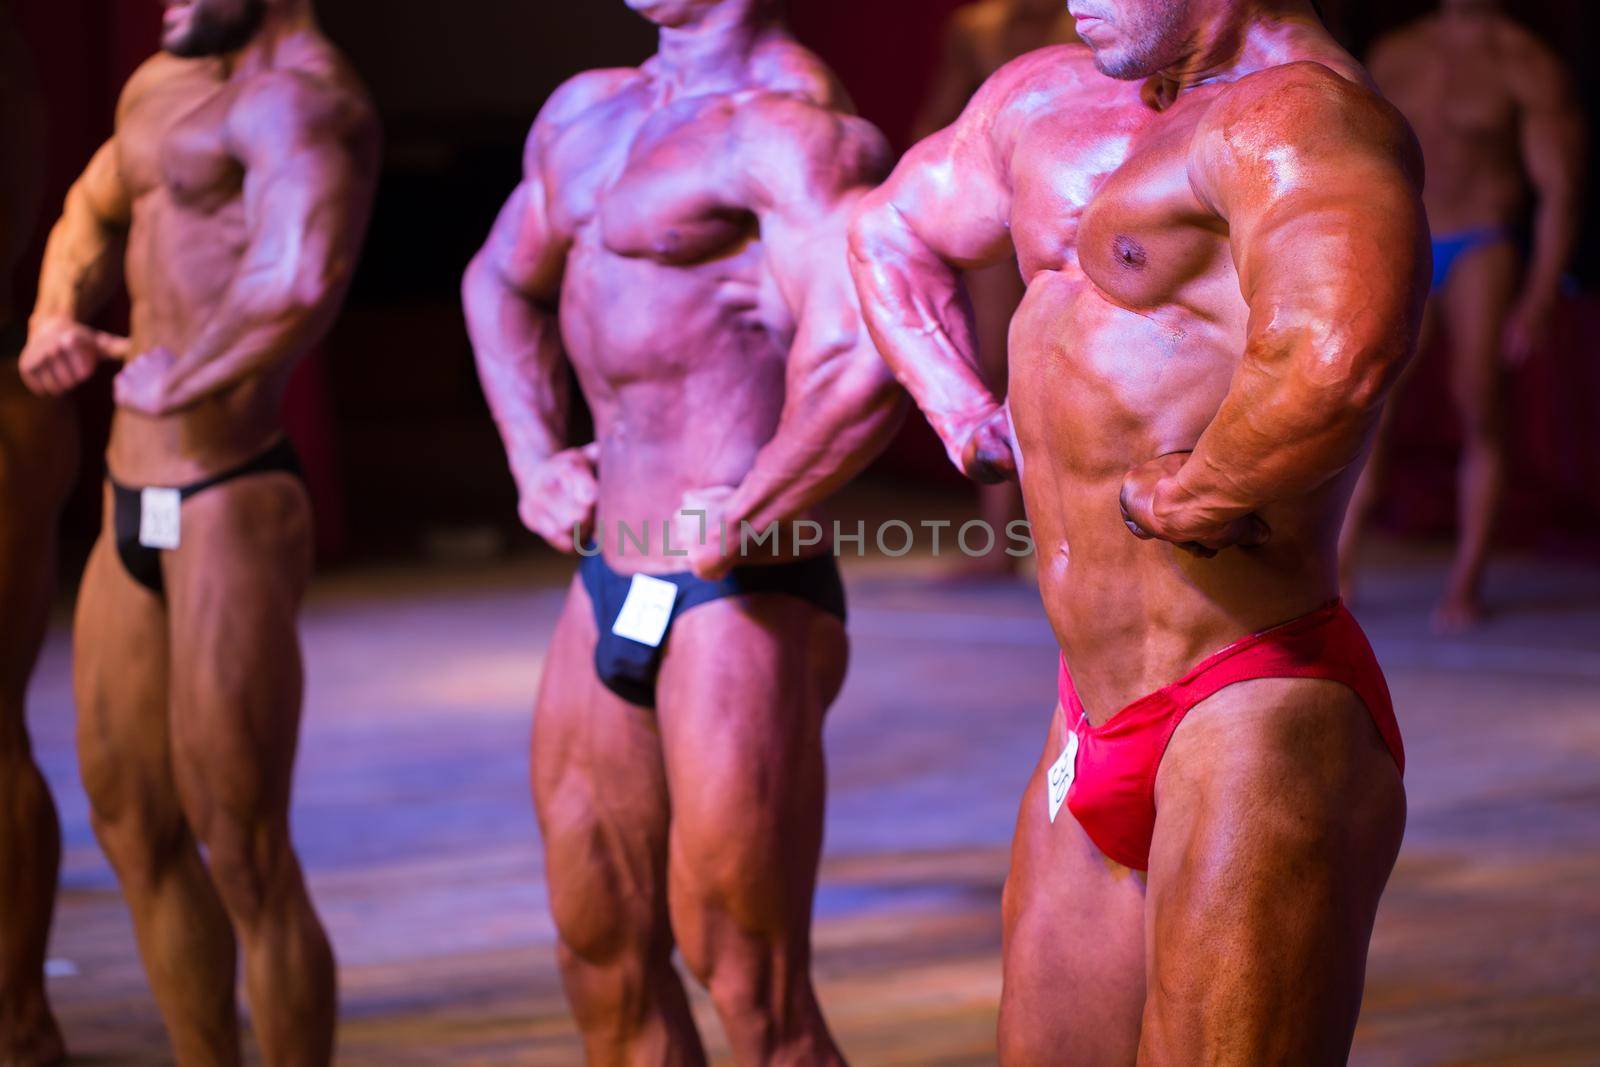 athlete bodybuilder demonstrates abdominal muscles and chest at competitions. by StudioPeace